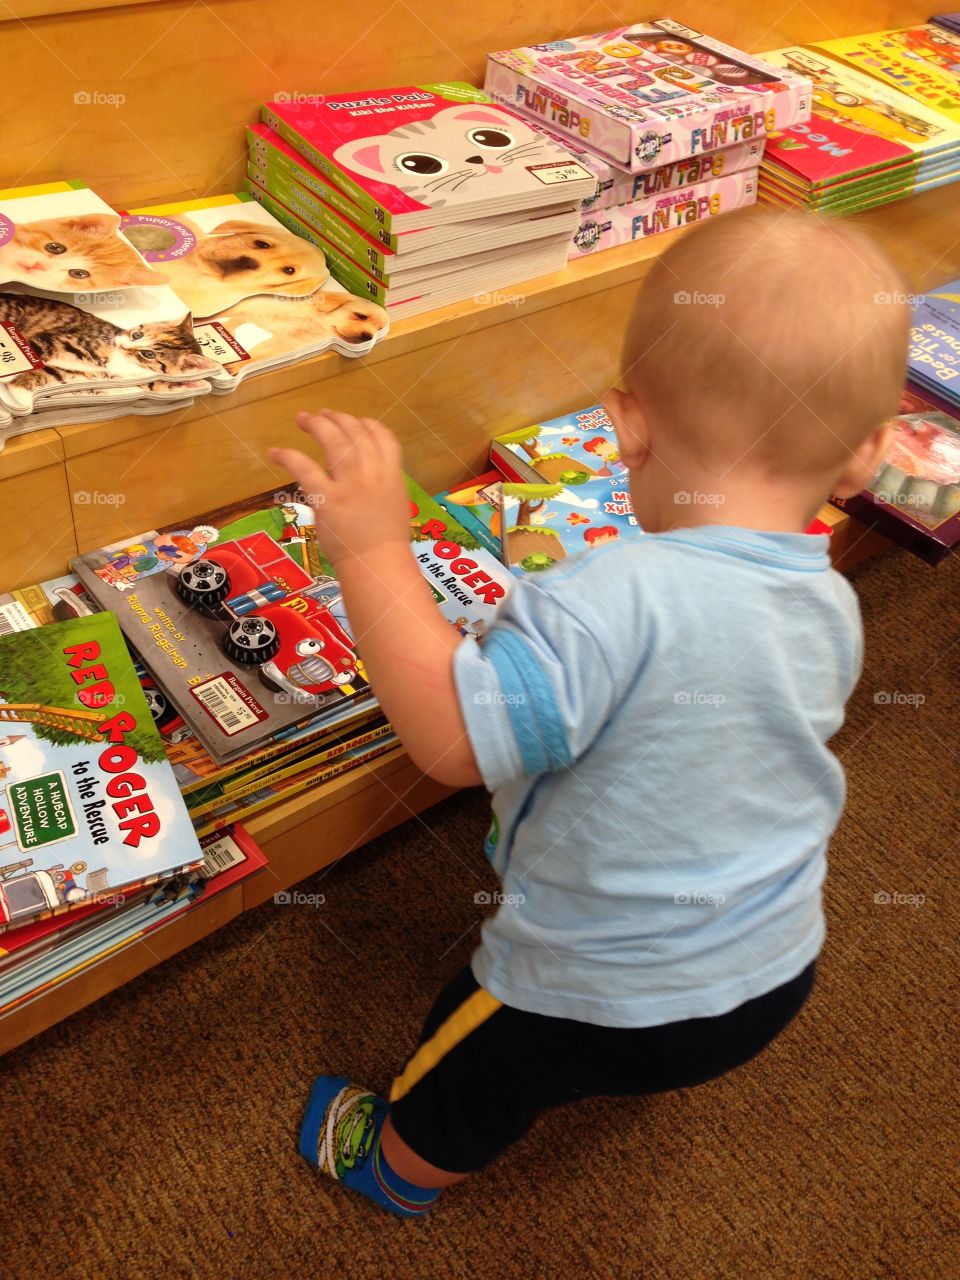 Toddler in bookstore. My son is 9 months old looking at books in a local bookstore. 